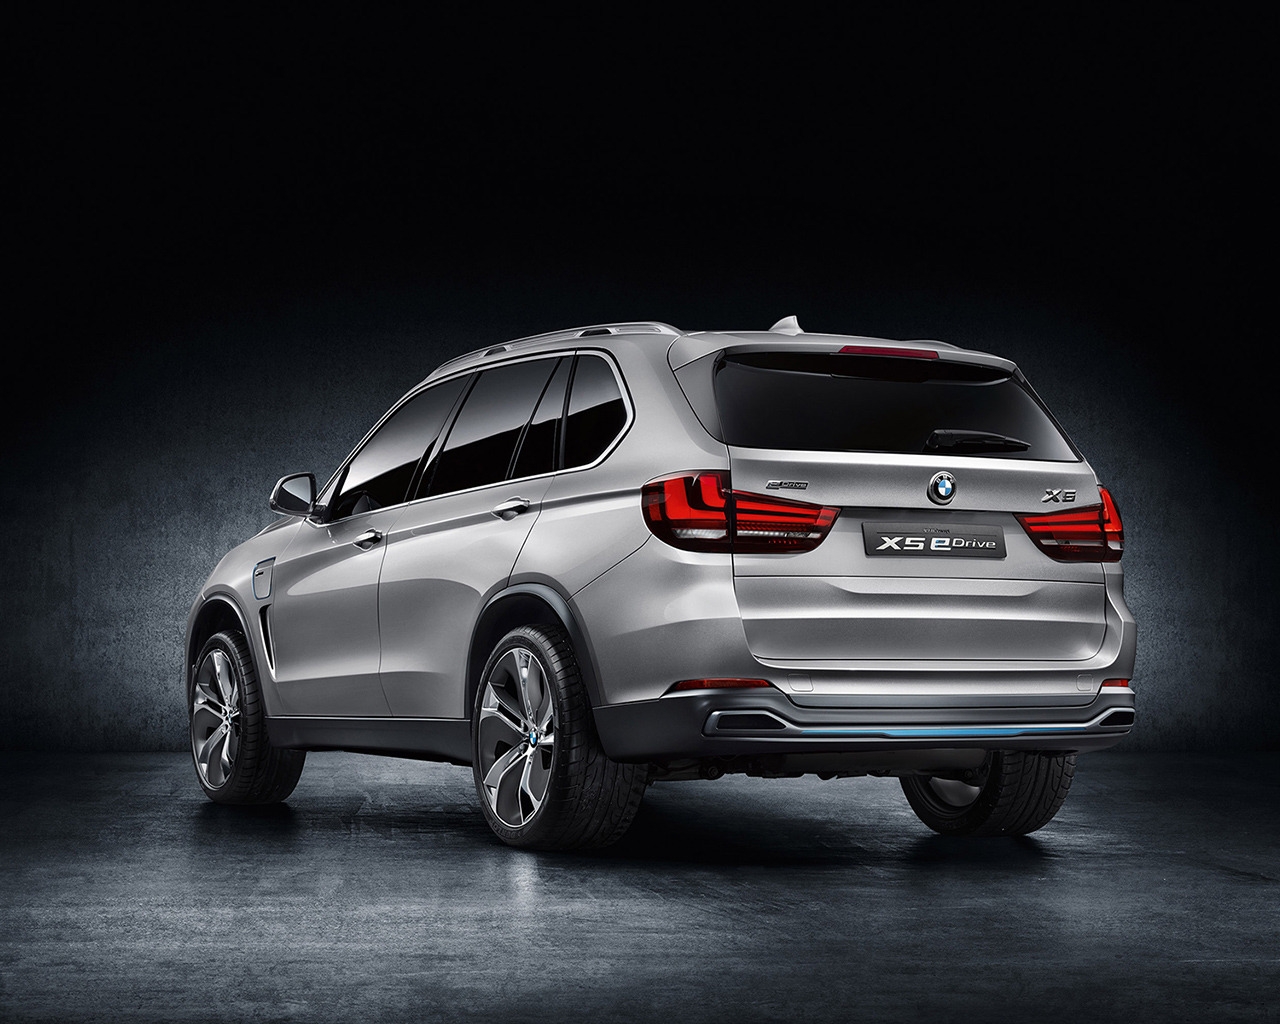 BMW X5 eDrive Concept Rear for 1280 x 1024 resolution